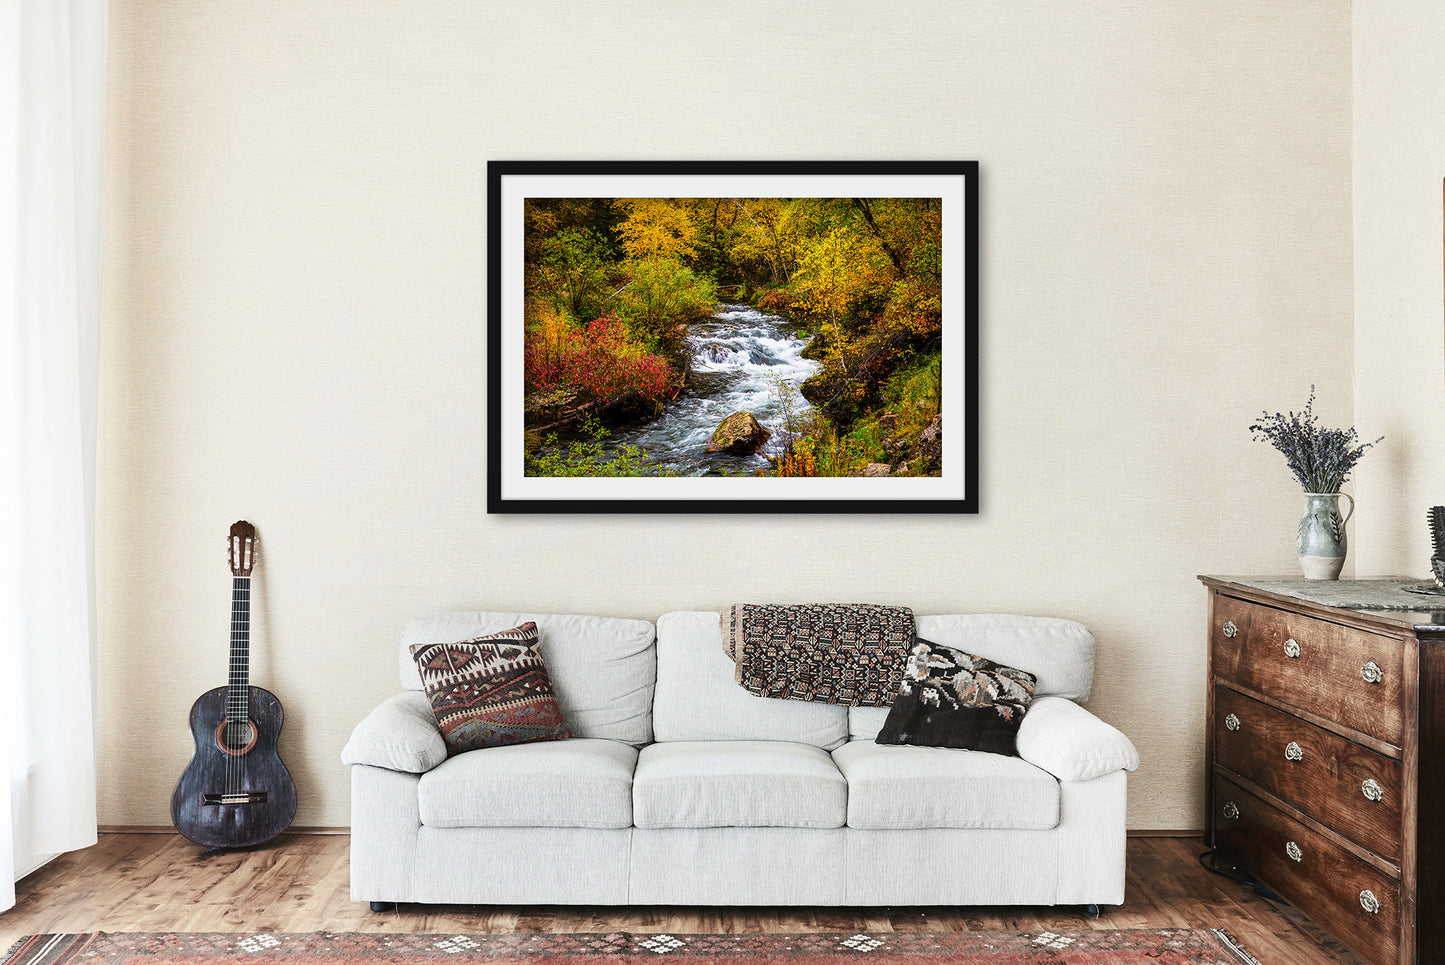 Spearfish Canyon Framed and Matted Print | Creek in Fall Color Photo | South Dakota Decor | Black Hills Photography | Nature Wall Art | Ready to Hang